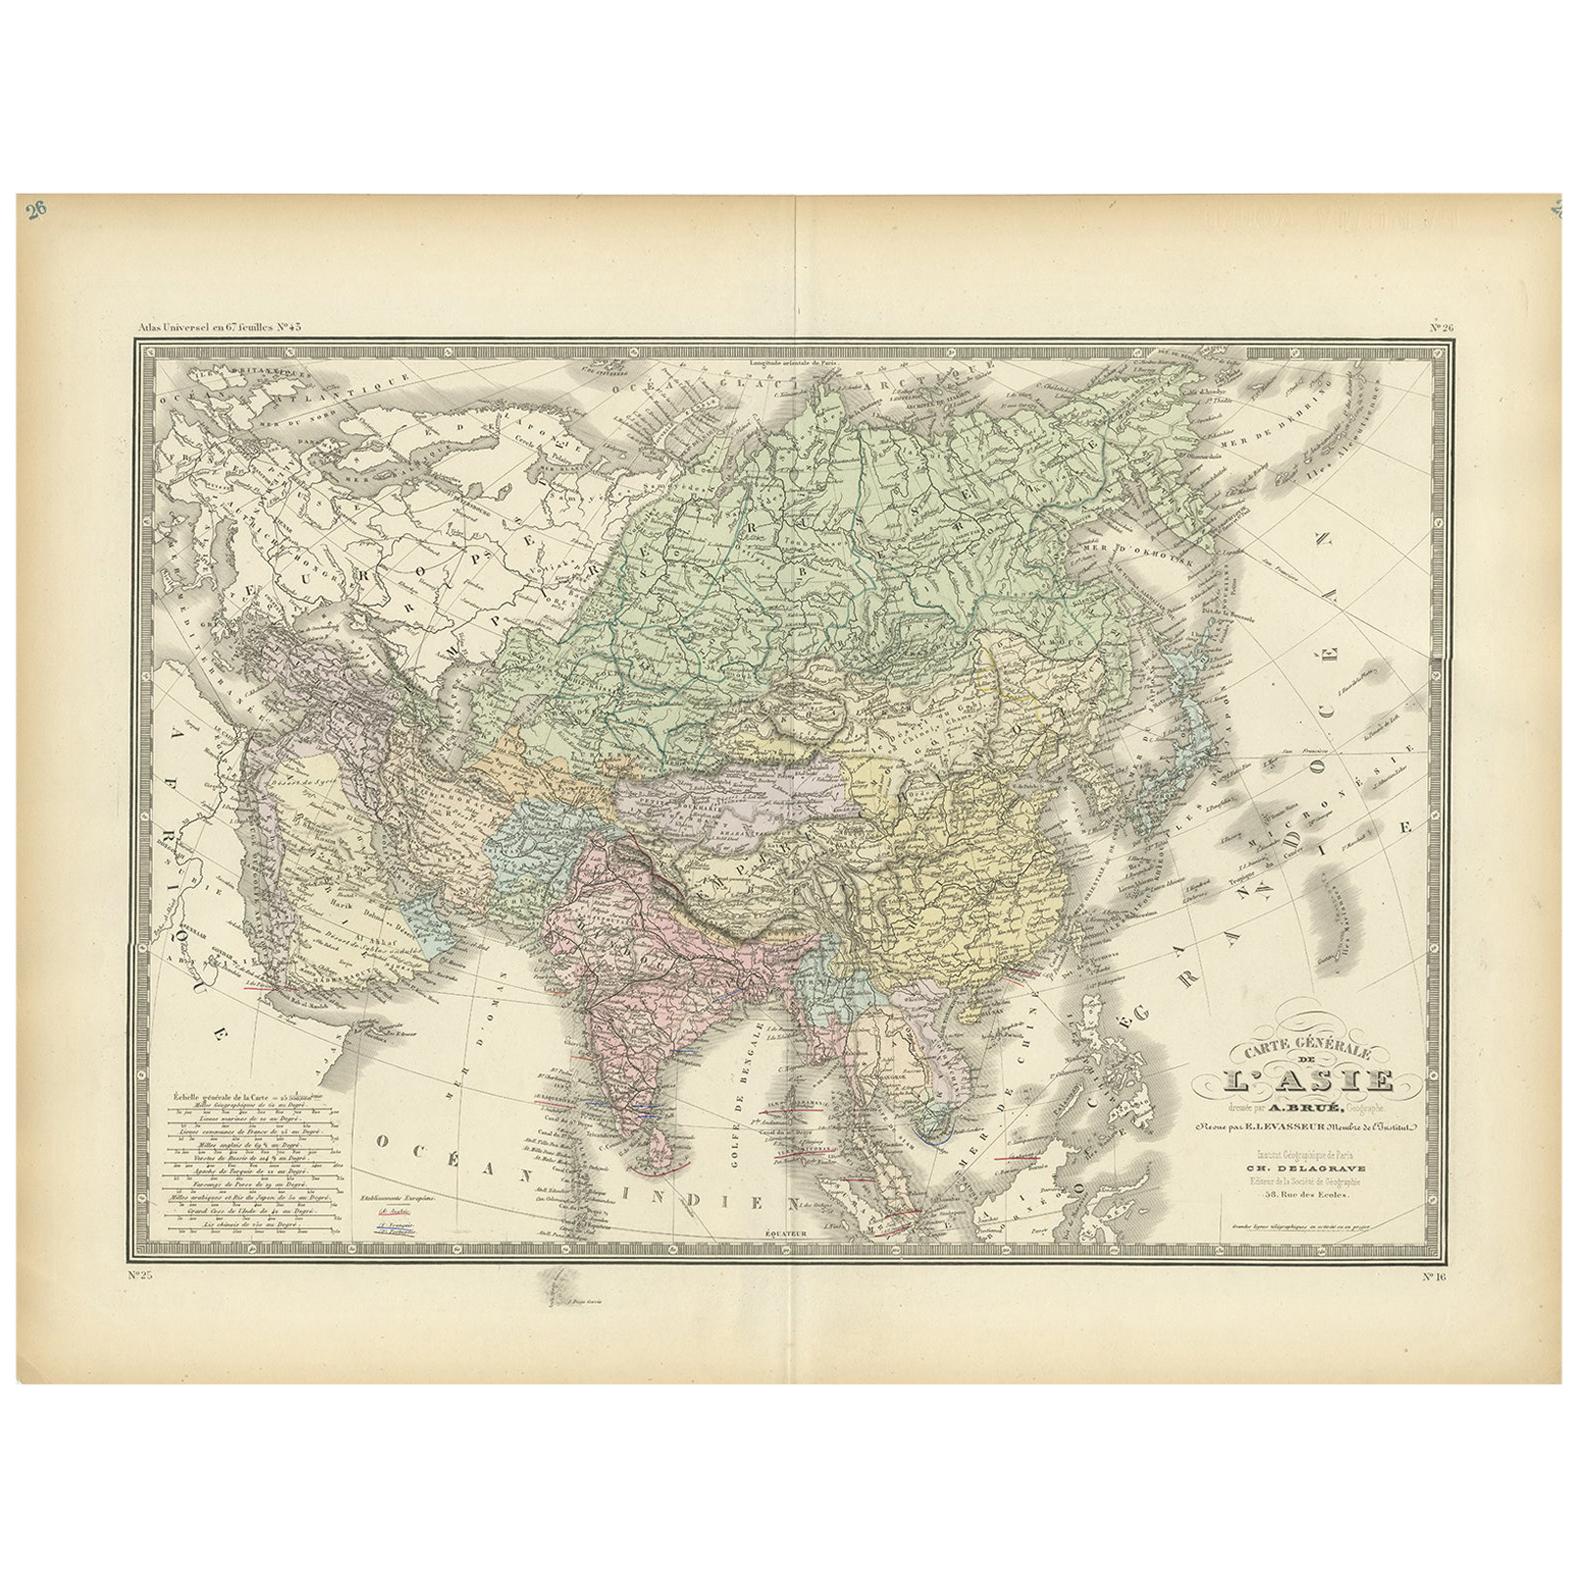 Antique Map of the Asian Continent by Levasseur, '1875'